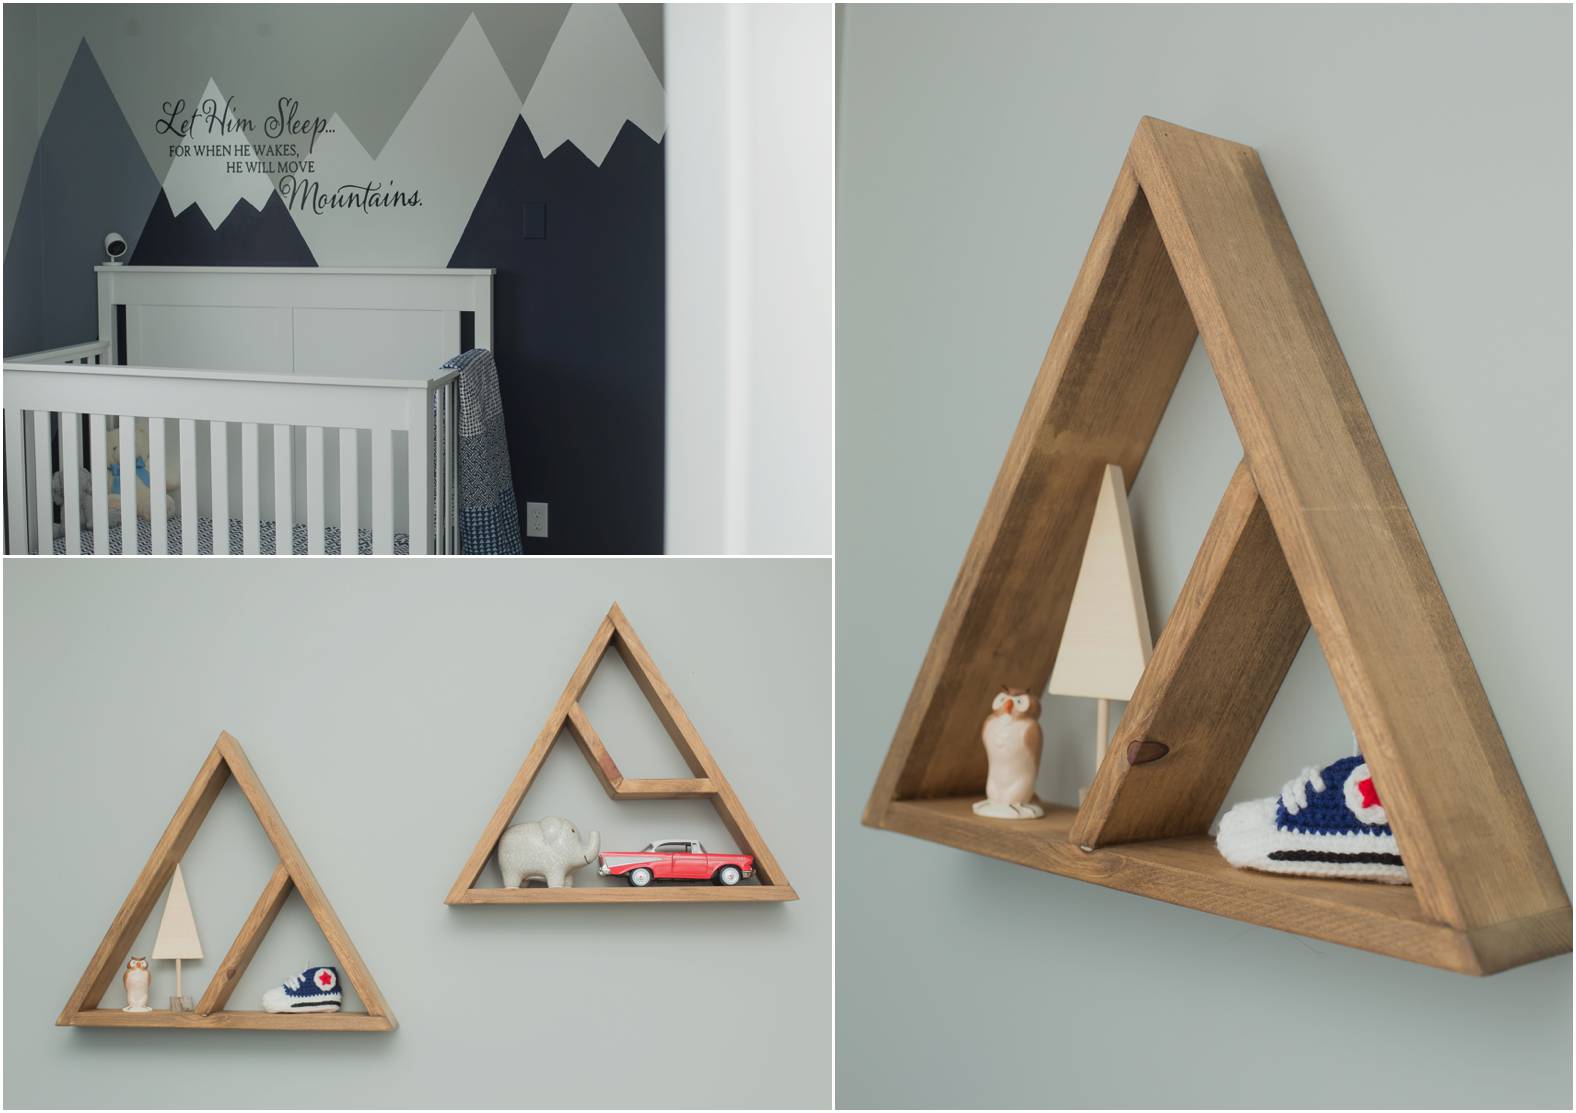 Nursery details with wooden triangle frames and mountain wall decal